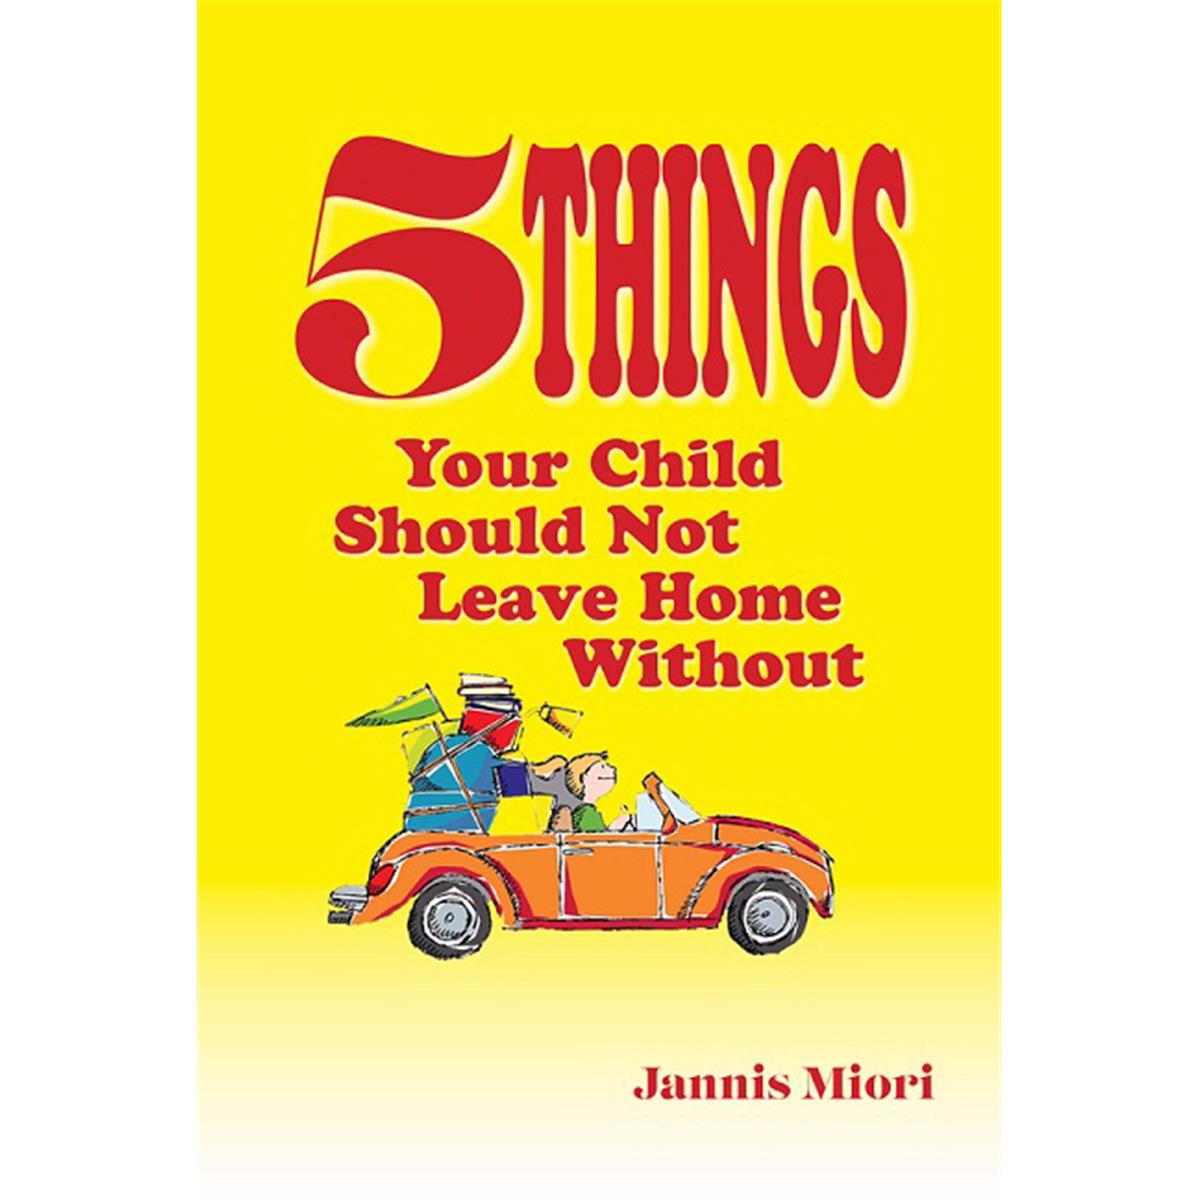 164505 Five Things Your Child Should Not Leave Home Without